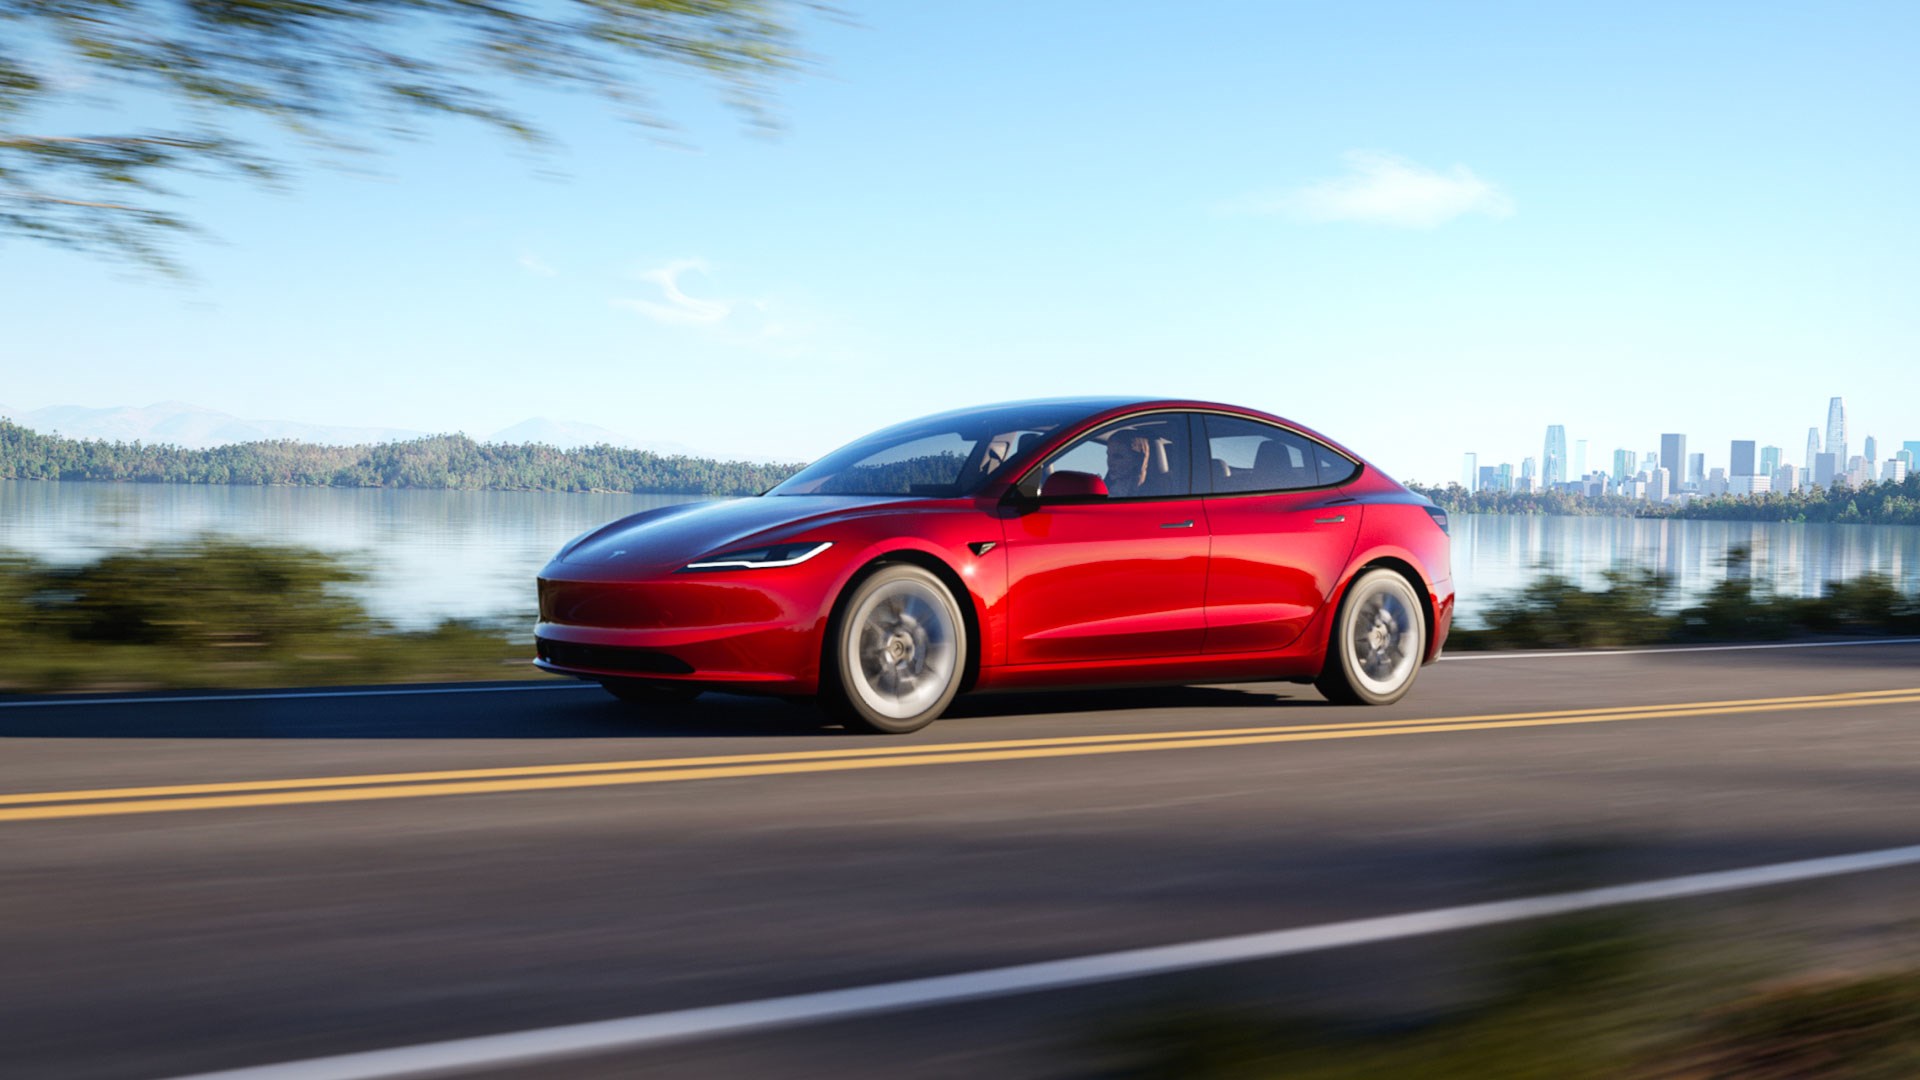 New Tesla Electric Car Testing To Start This Year - Could Be Named Model 2